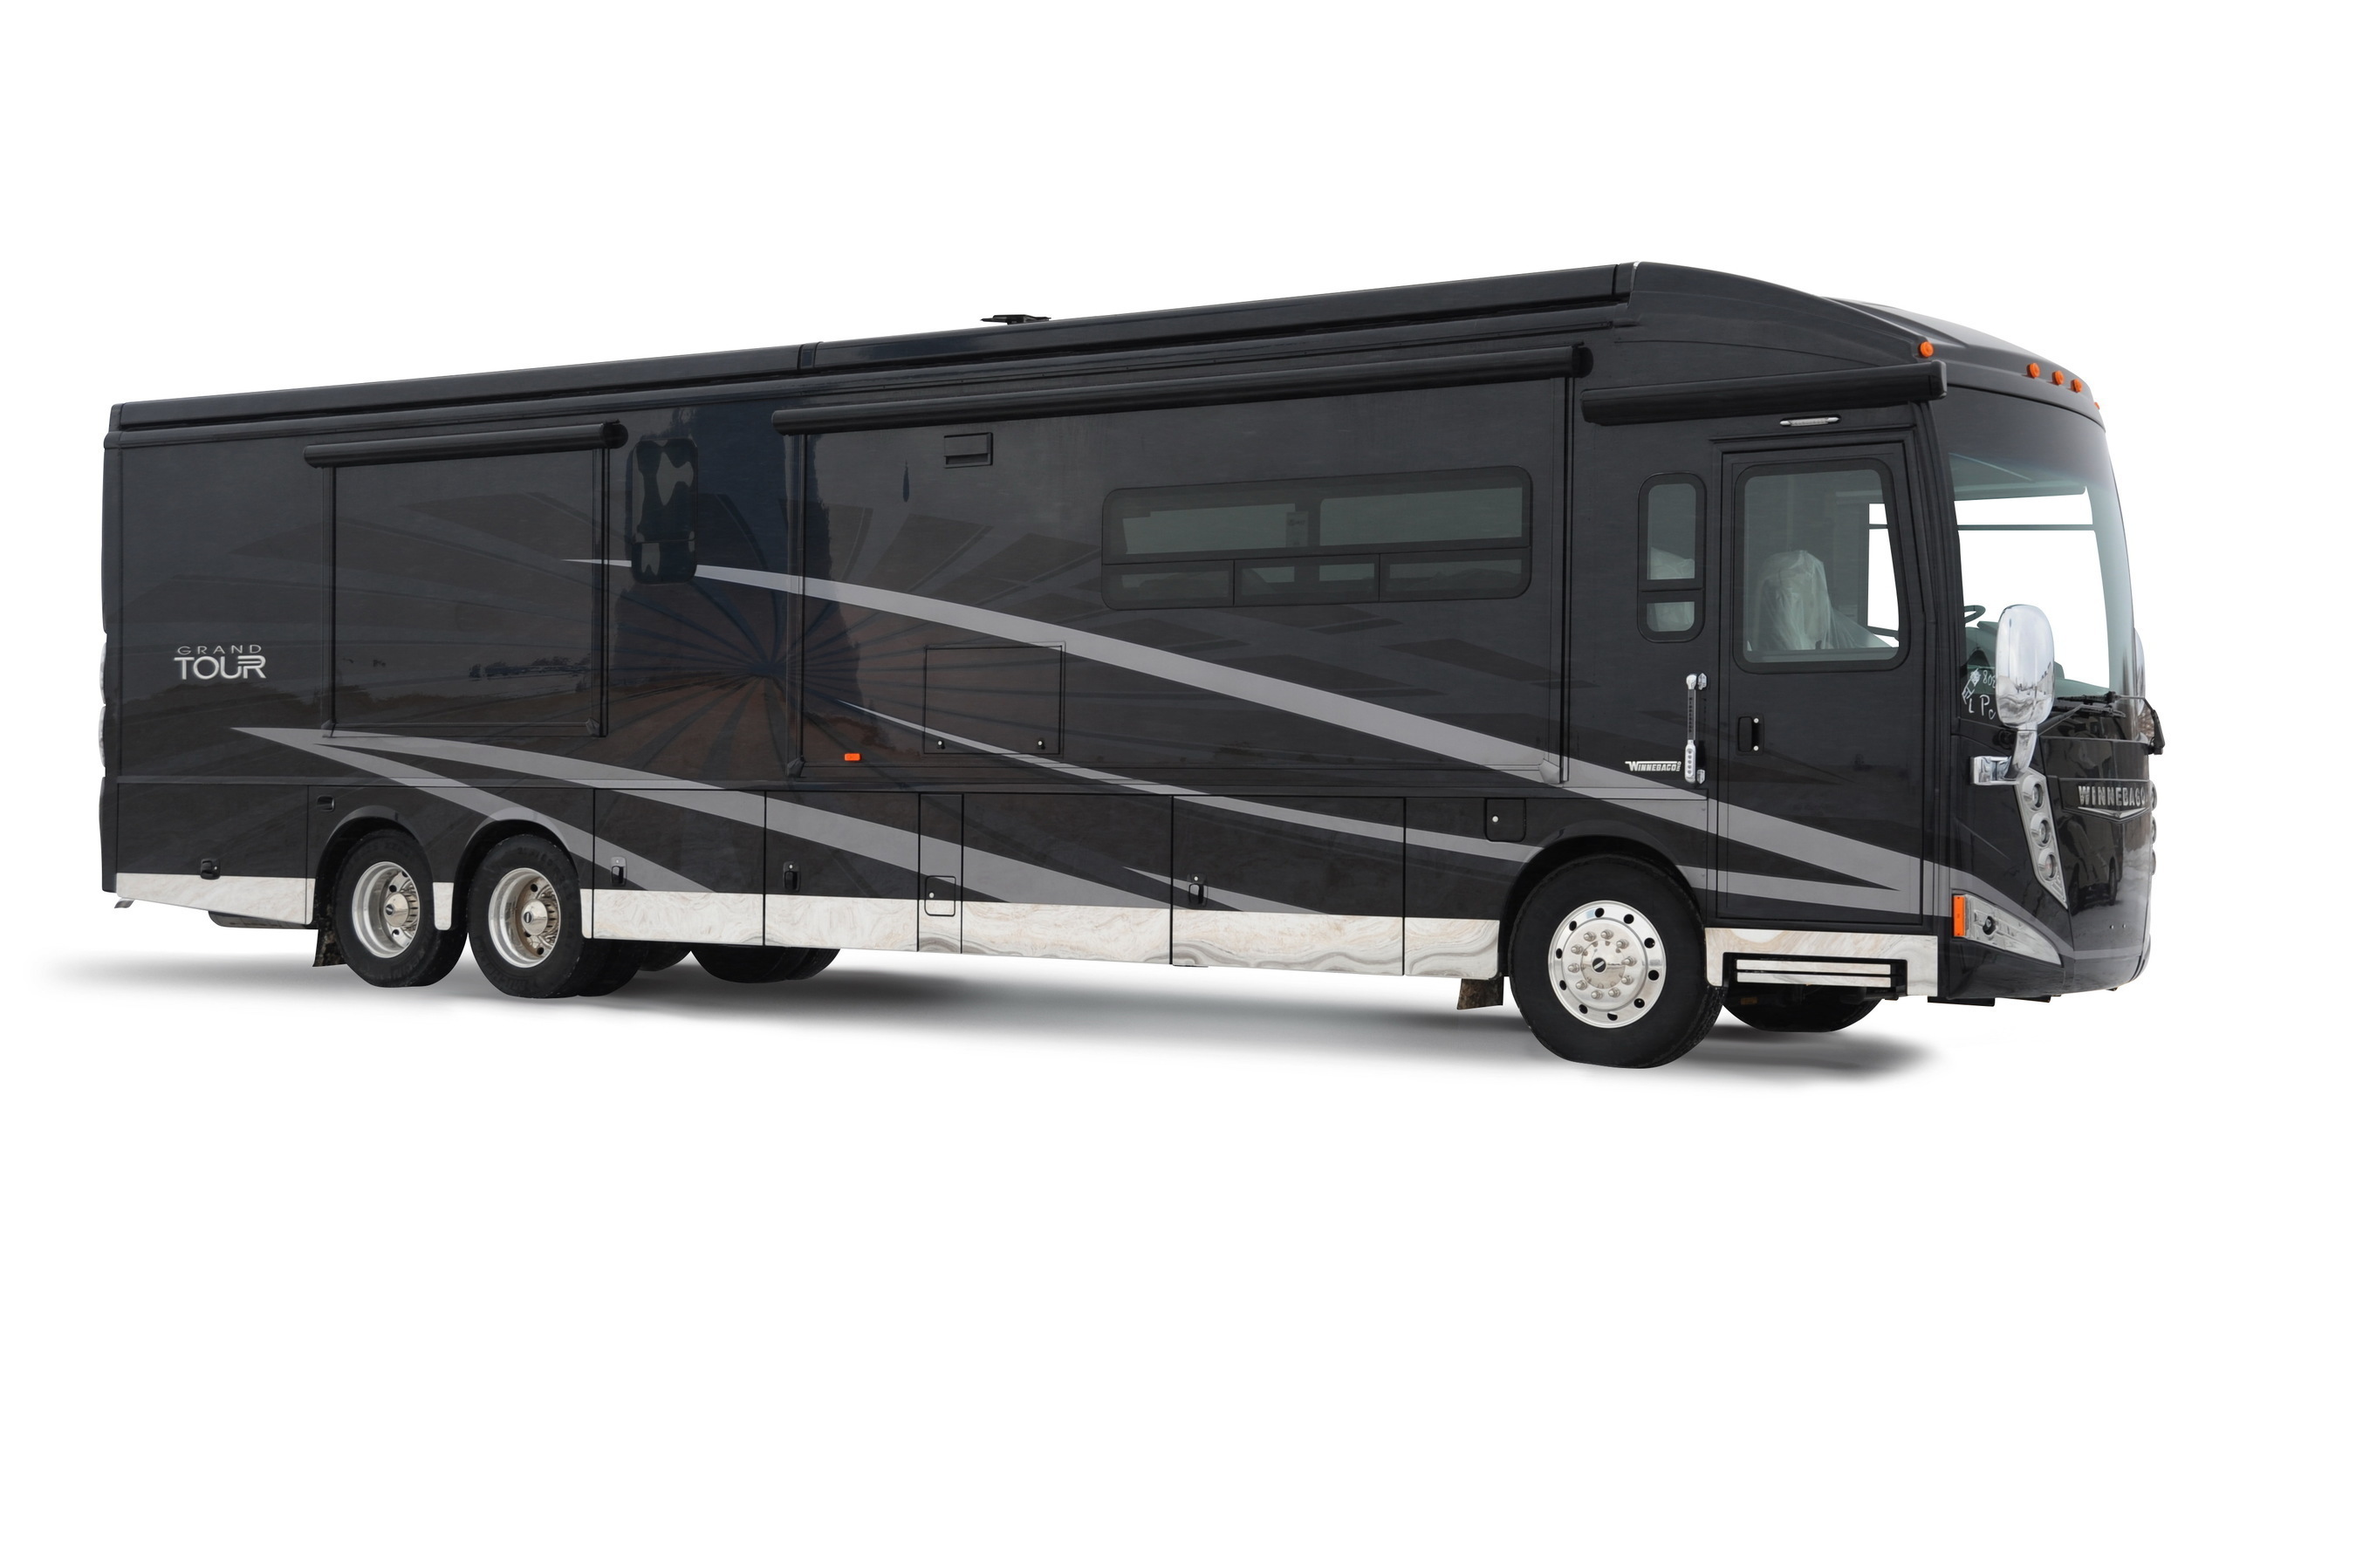 The Grand Tour was introduced as Winnebago's new flagship product at the Company's Dealer Days event in Las Vegas today. (PRNewsFoto/Winnebago Industries, Inc.)